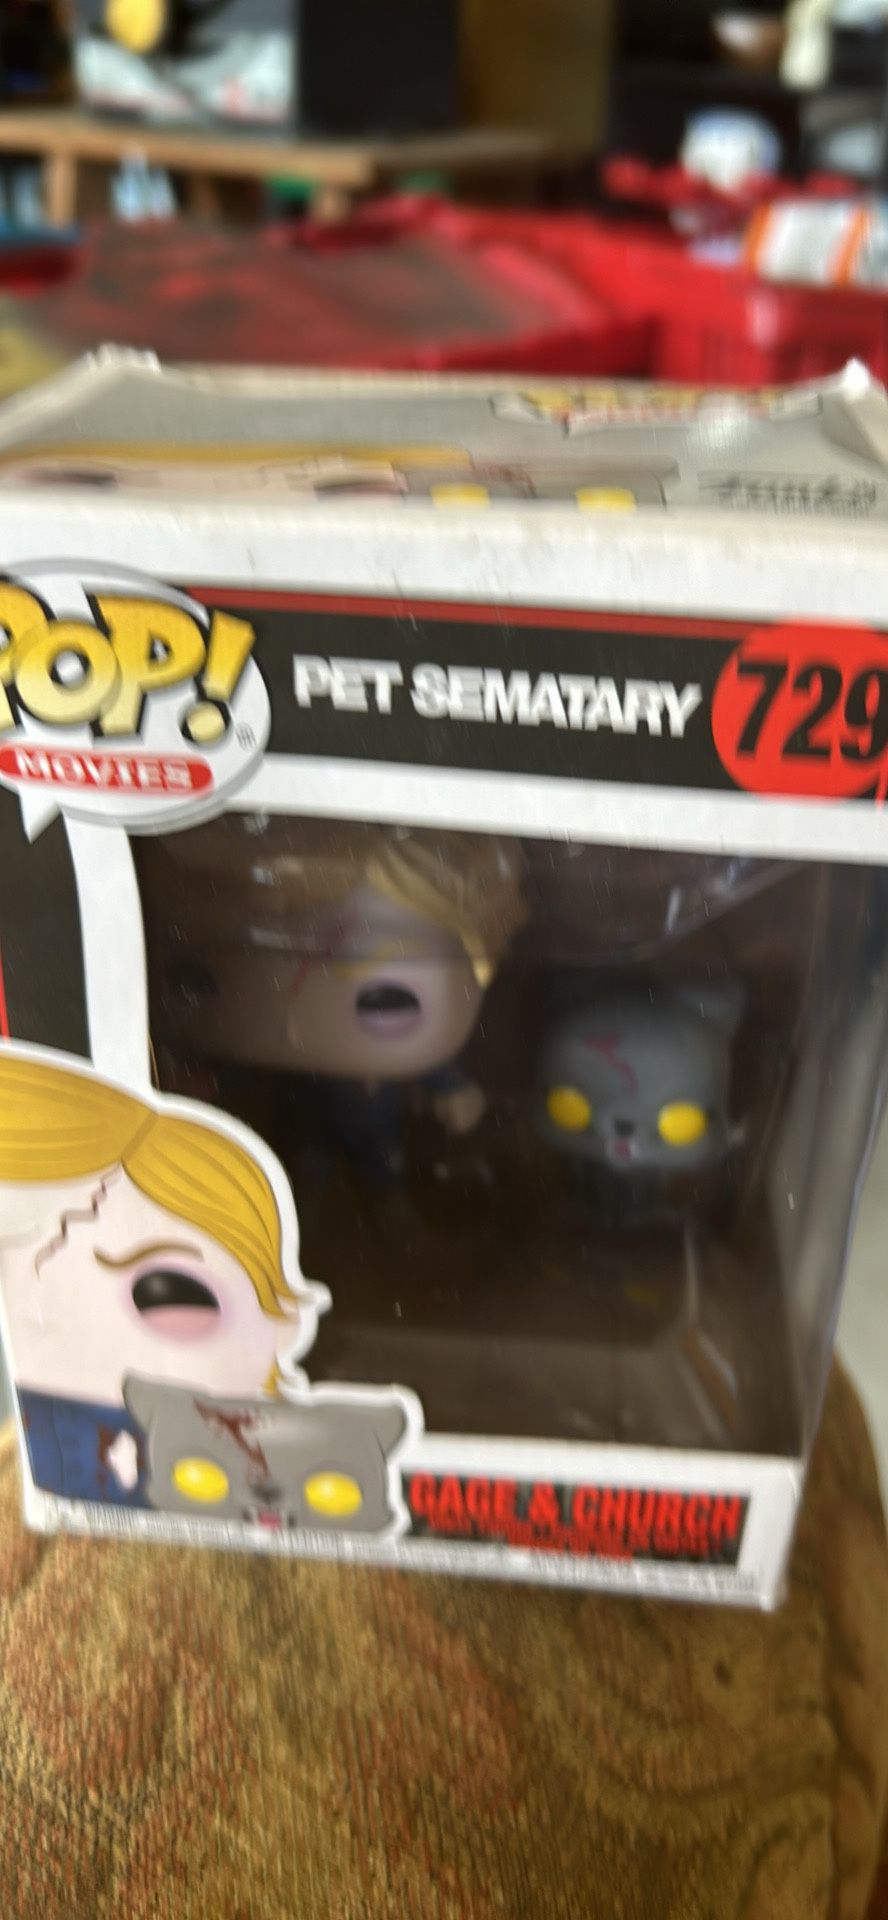 Pet Sematary Undead Gage and Church Pop! Vinyl Figure #729